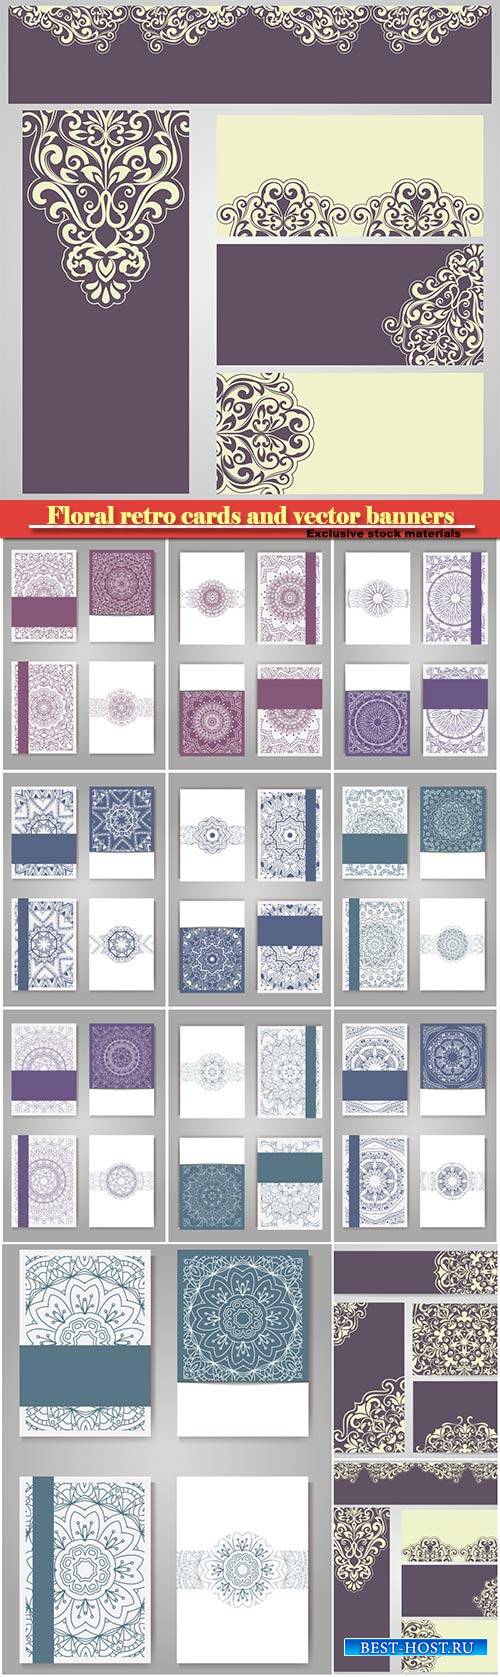 Floral retro cards and vector banners template with decorative ornament